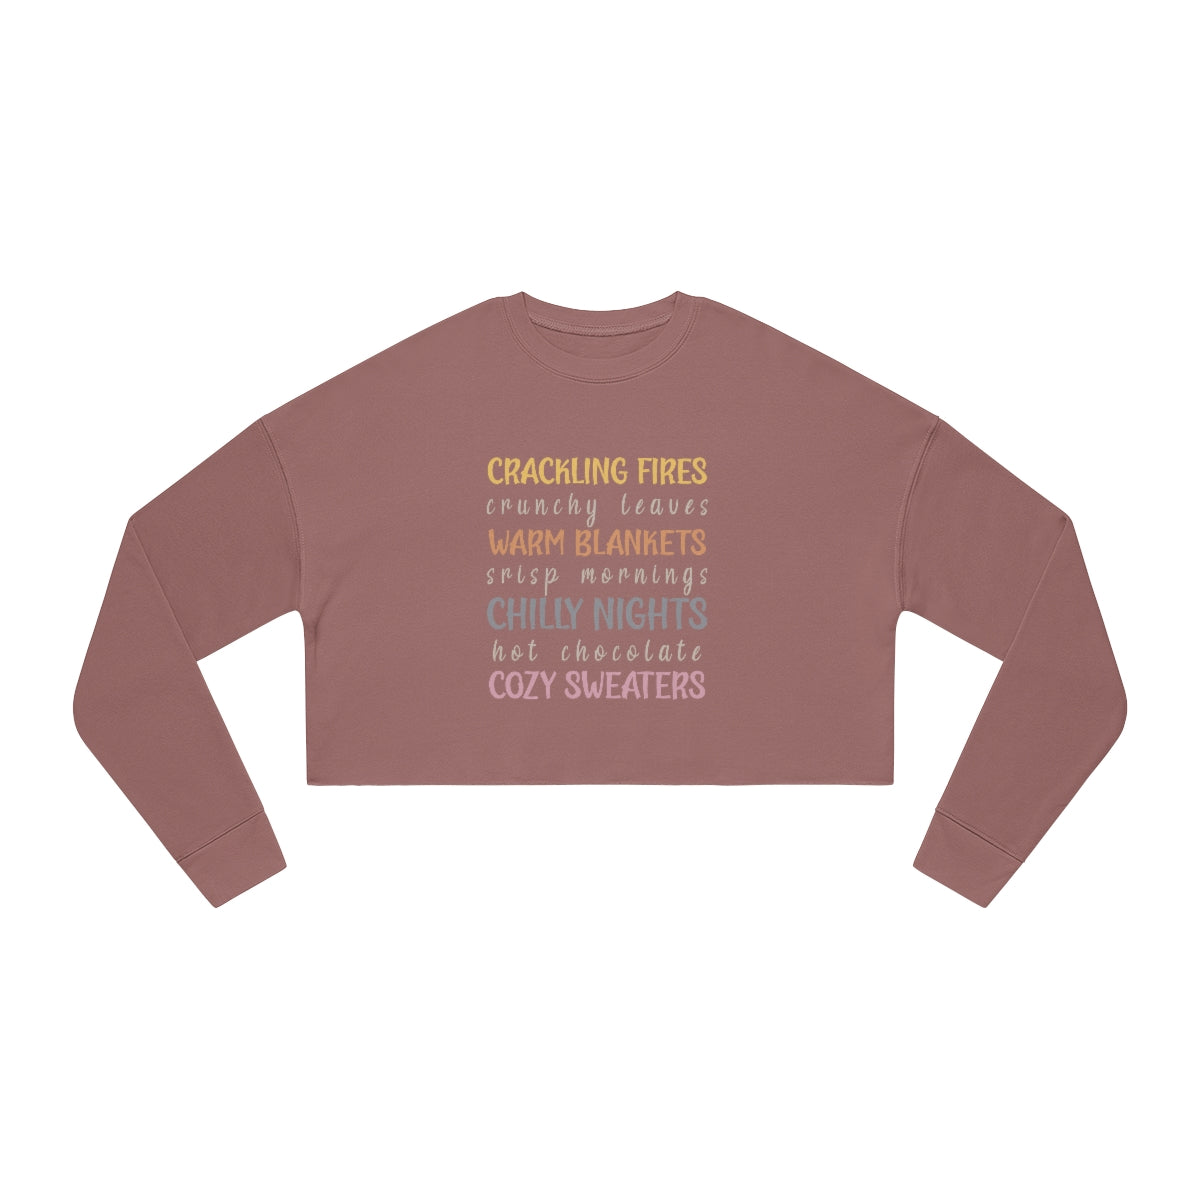 Cracking fires Chilly Night Design Women's Cropped Sweatshirt